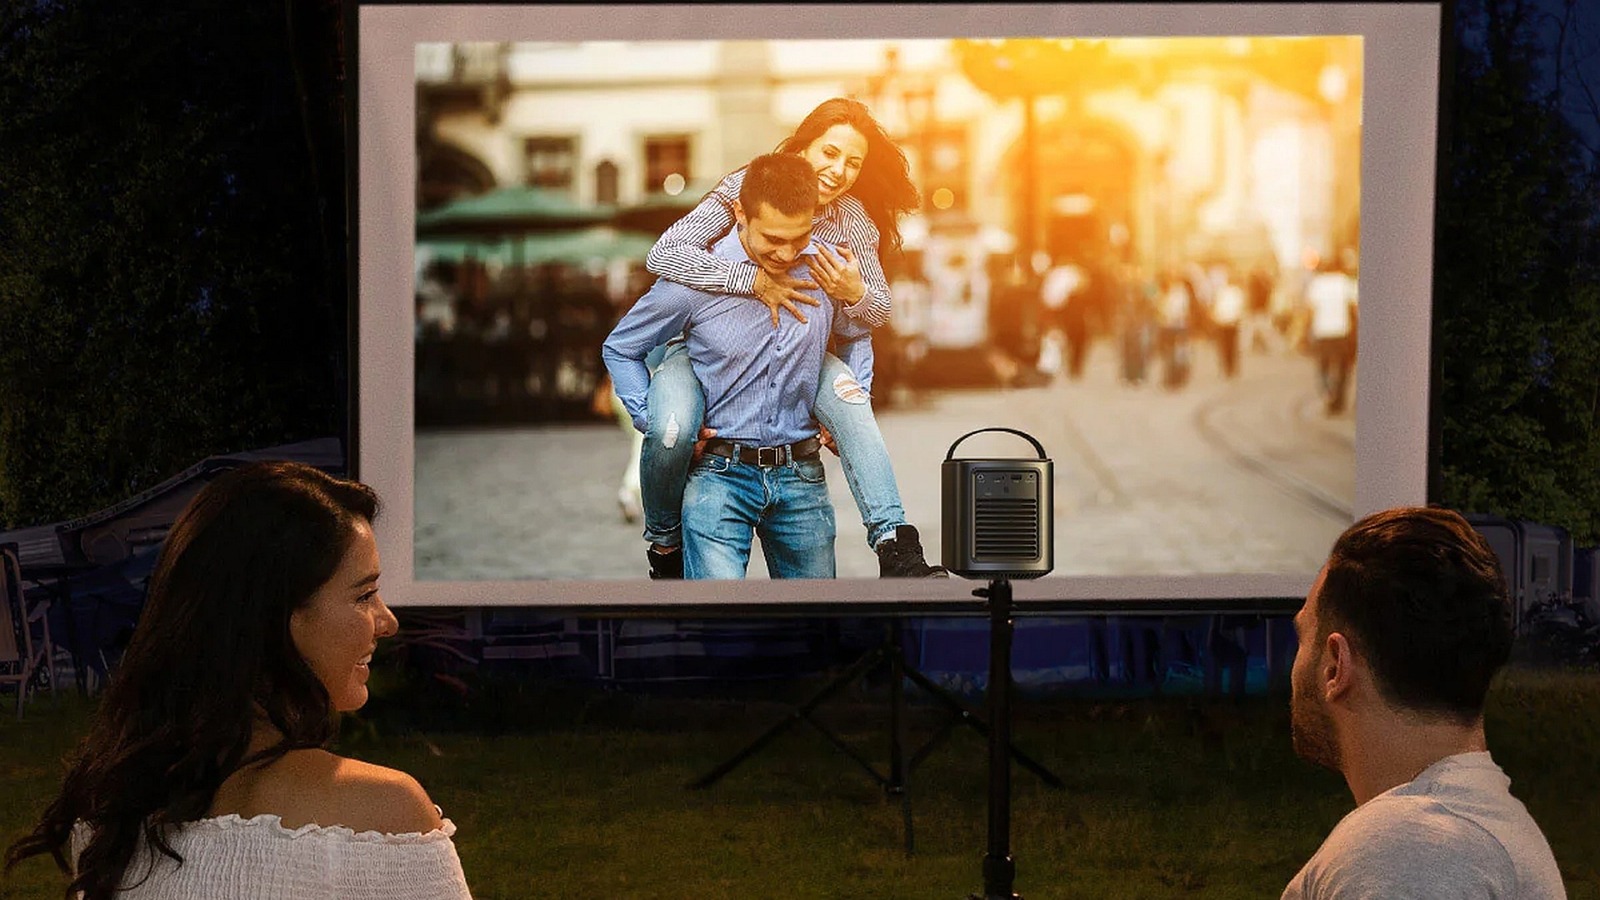 5 Mobile Projectors That Work With Your Smartphone